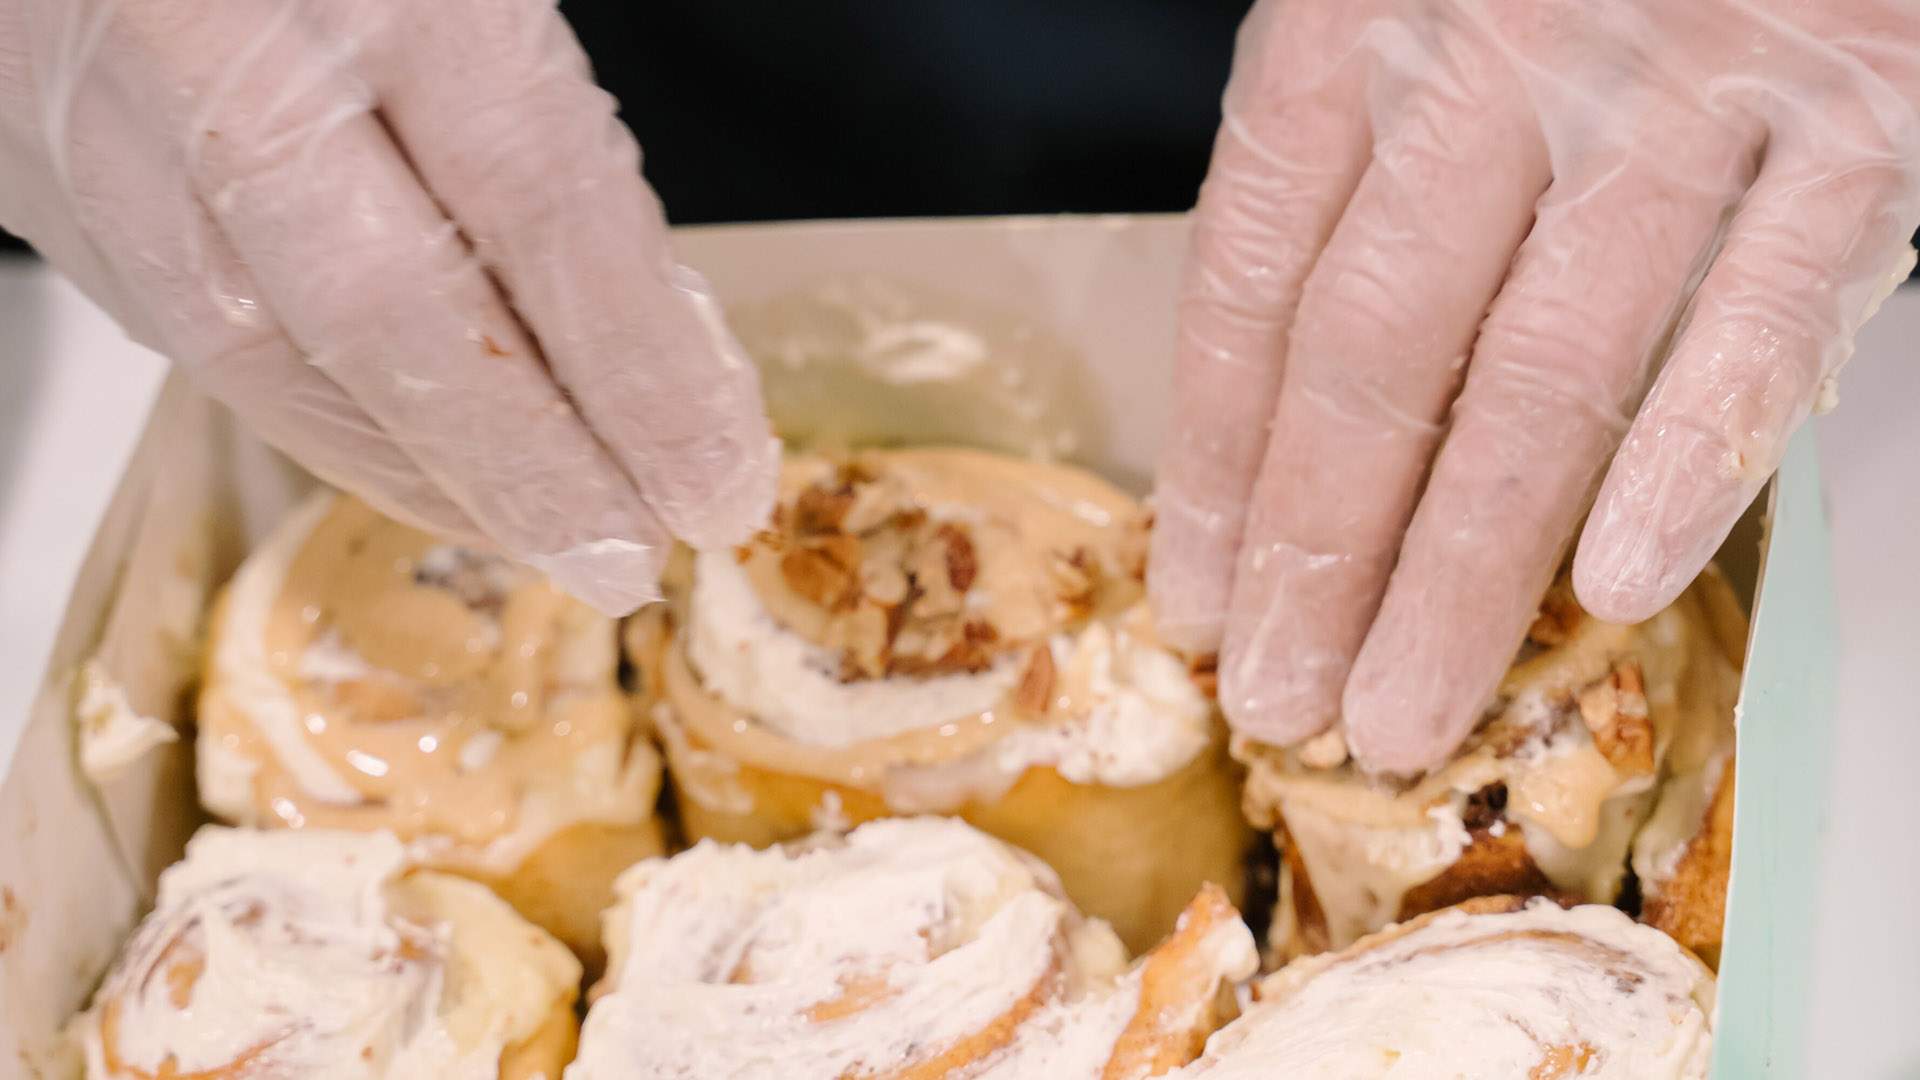 Prepare to Get Sticky: Cinnabon Is Opening Its Long-Awaited First Sydney Store in January